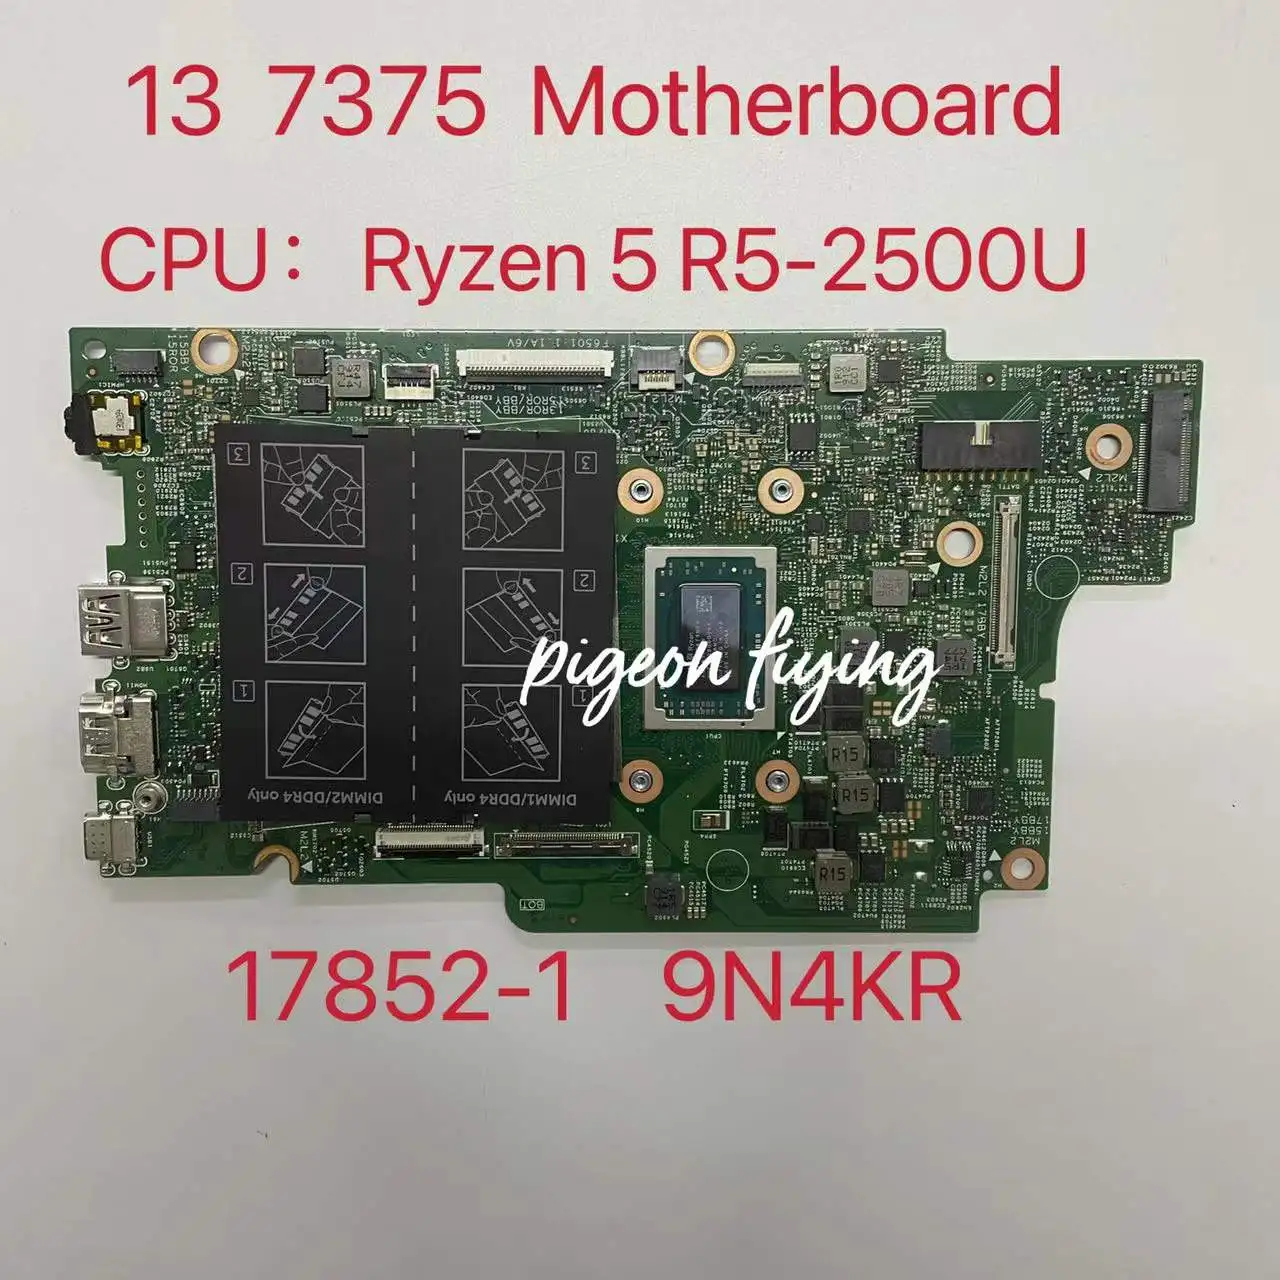 

17852-1 For Dell Inspiron 13 7375 Laptop Motherboard K6D95 0K6D95 CN-0K6D95 With Ryzen 5-2500u CPU 100% Fully Tested